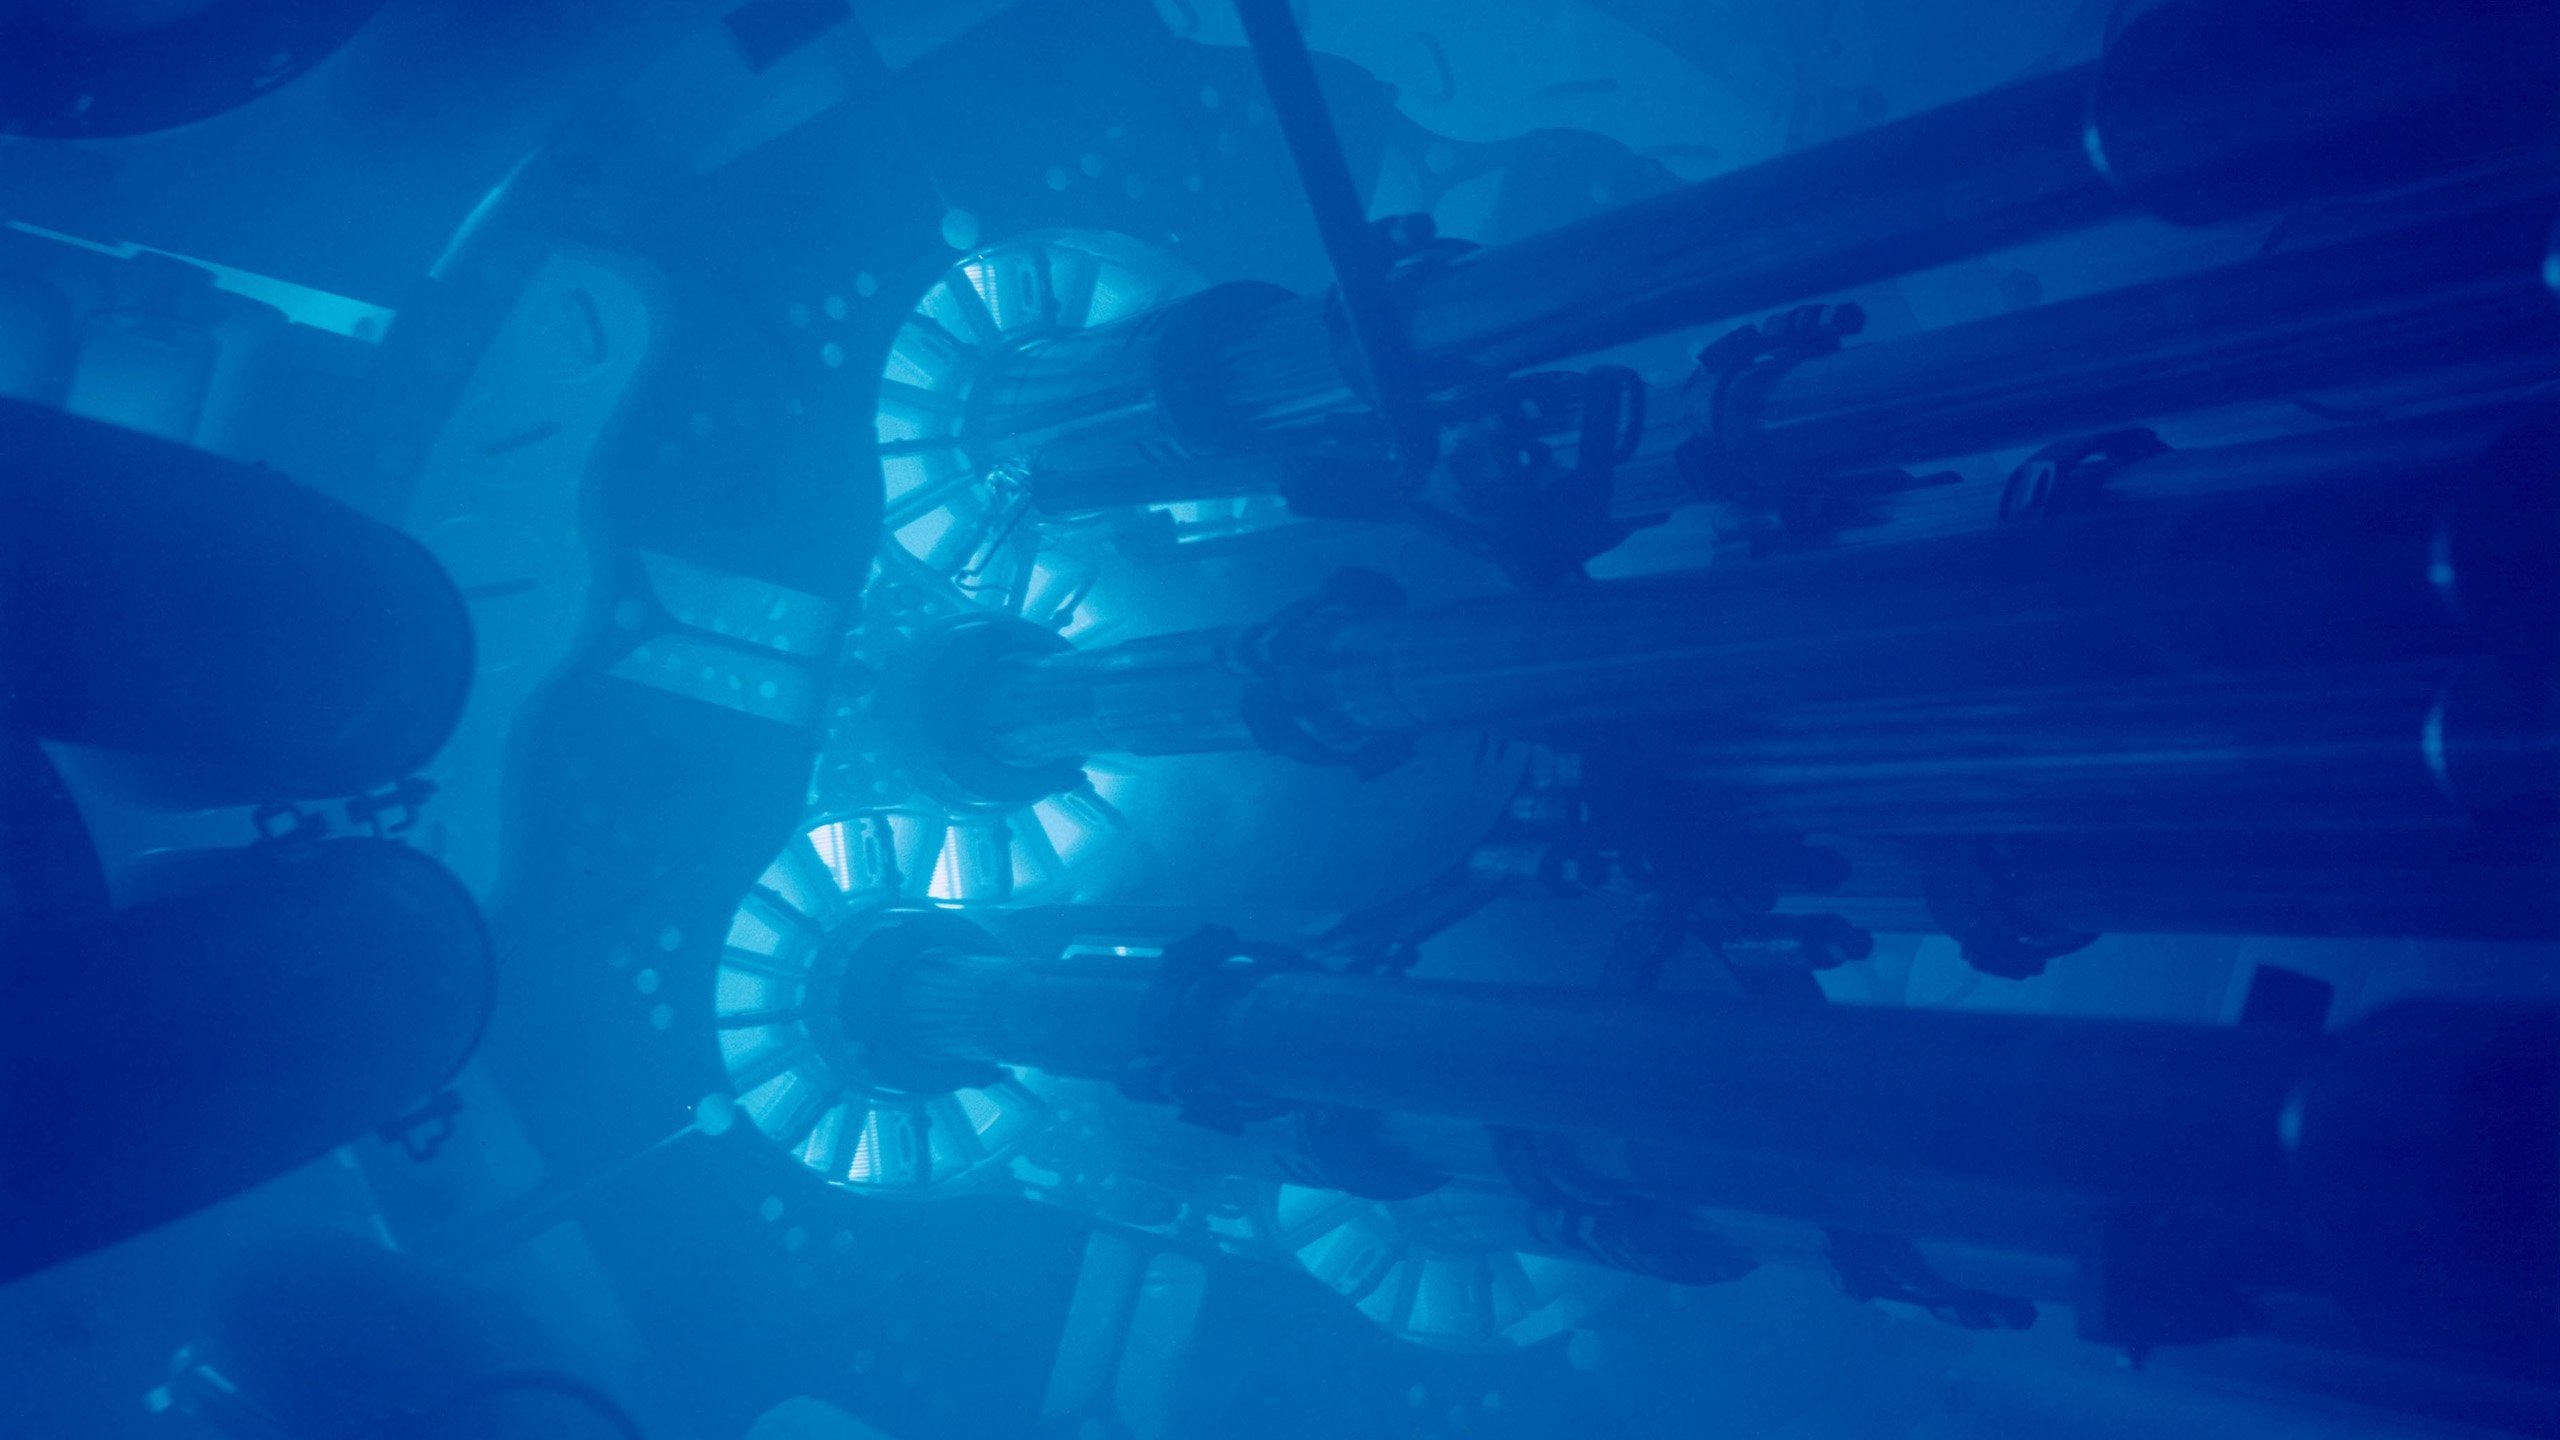 The glow of Cherenkov radiation from a nuclear reactor, WQHD_Wallpaper